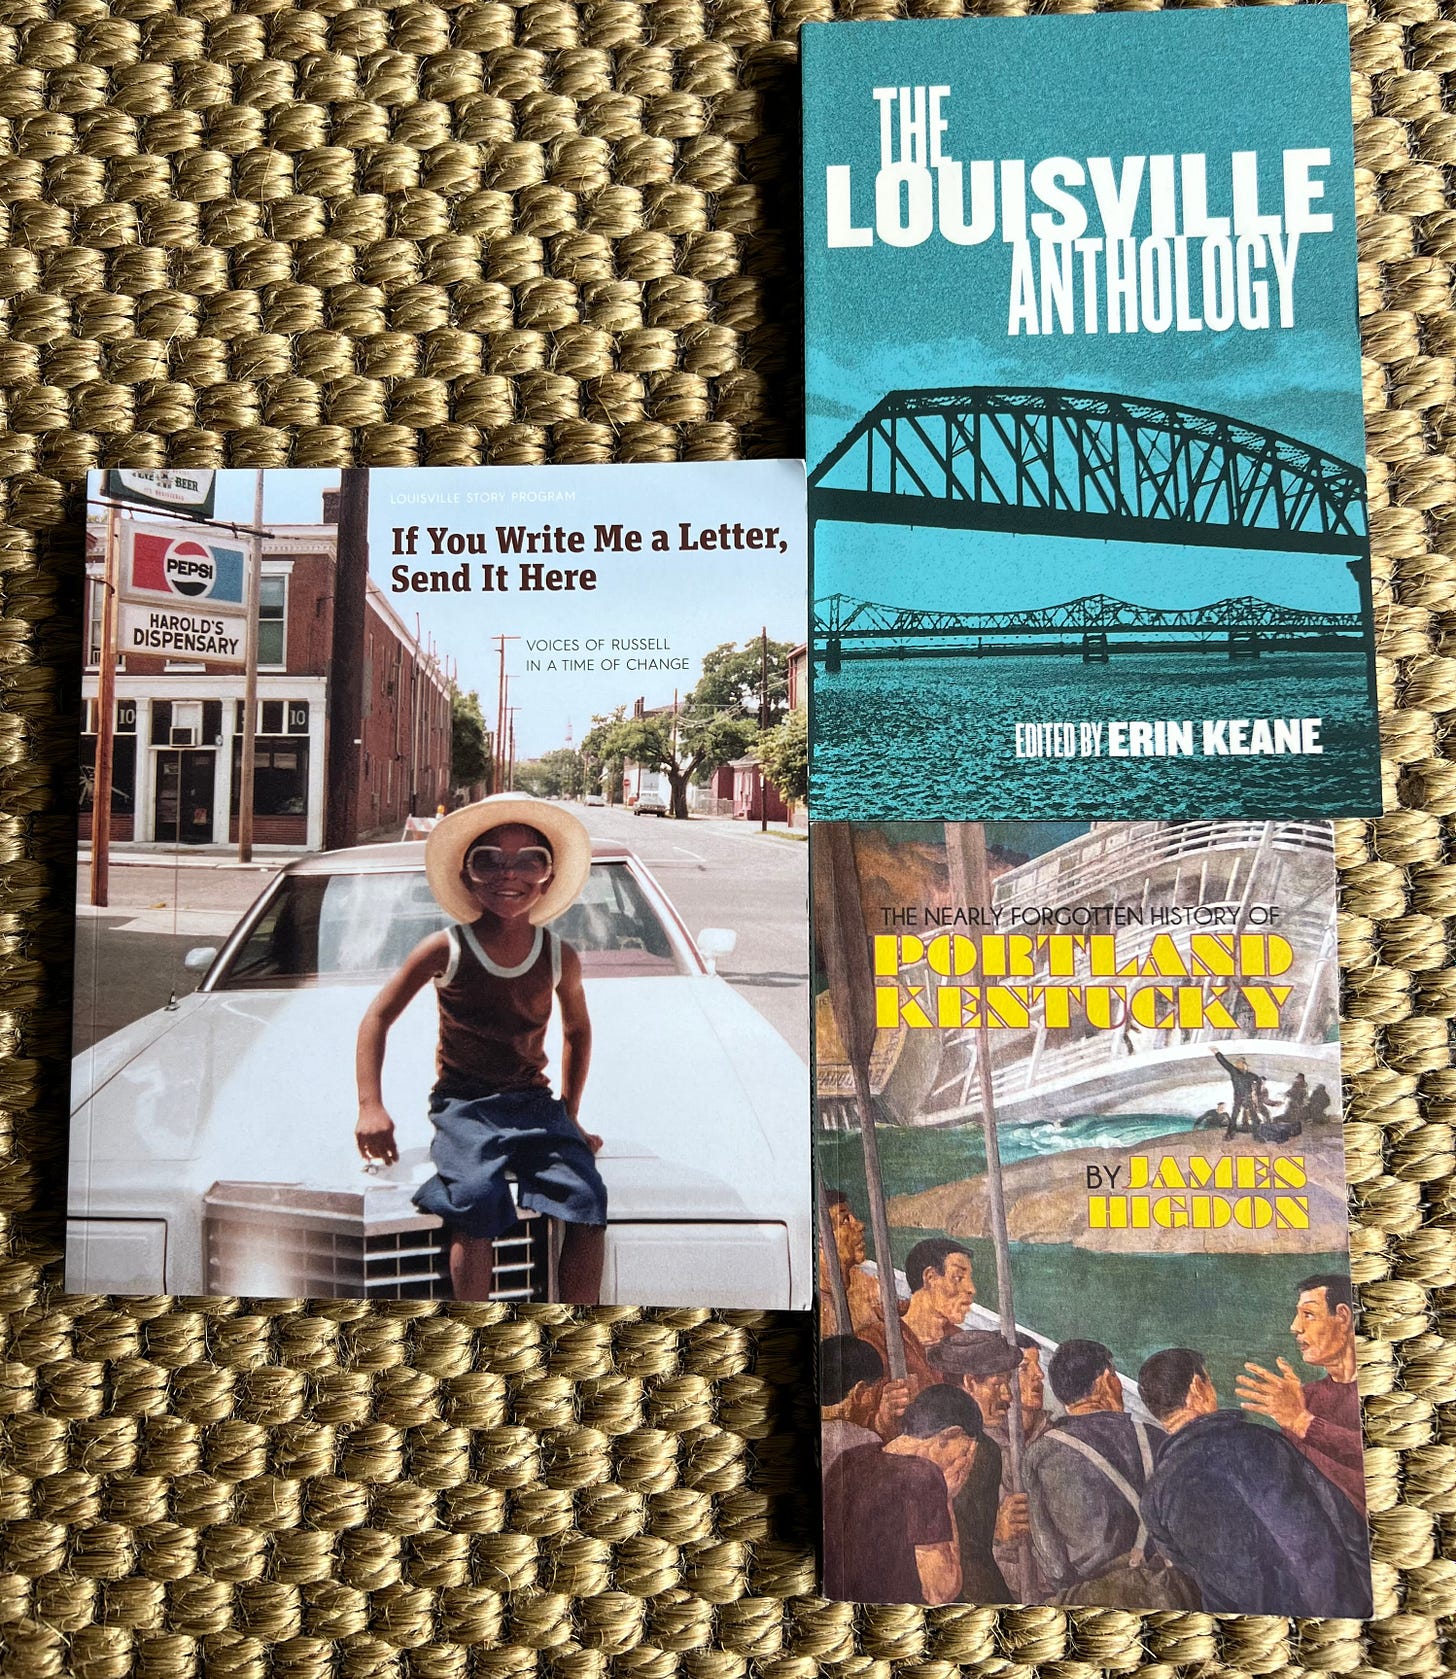 Books (L-R) "If you Write me a Letter, Send it Here," "The Louisville Anthology," "The Nearly Forgotten History of Portland Kentucky"